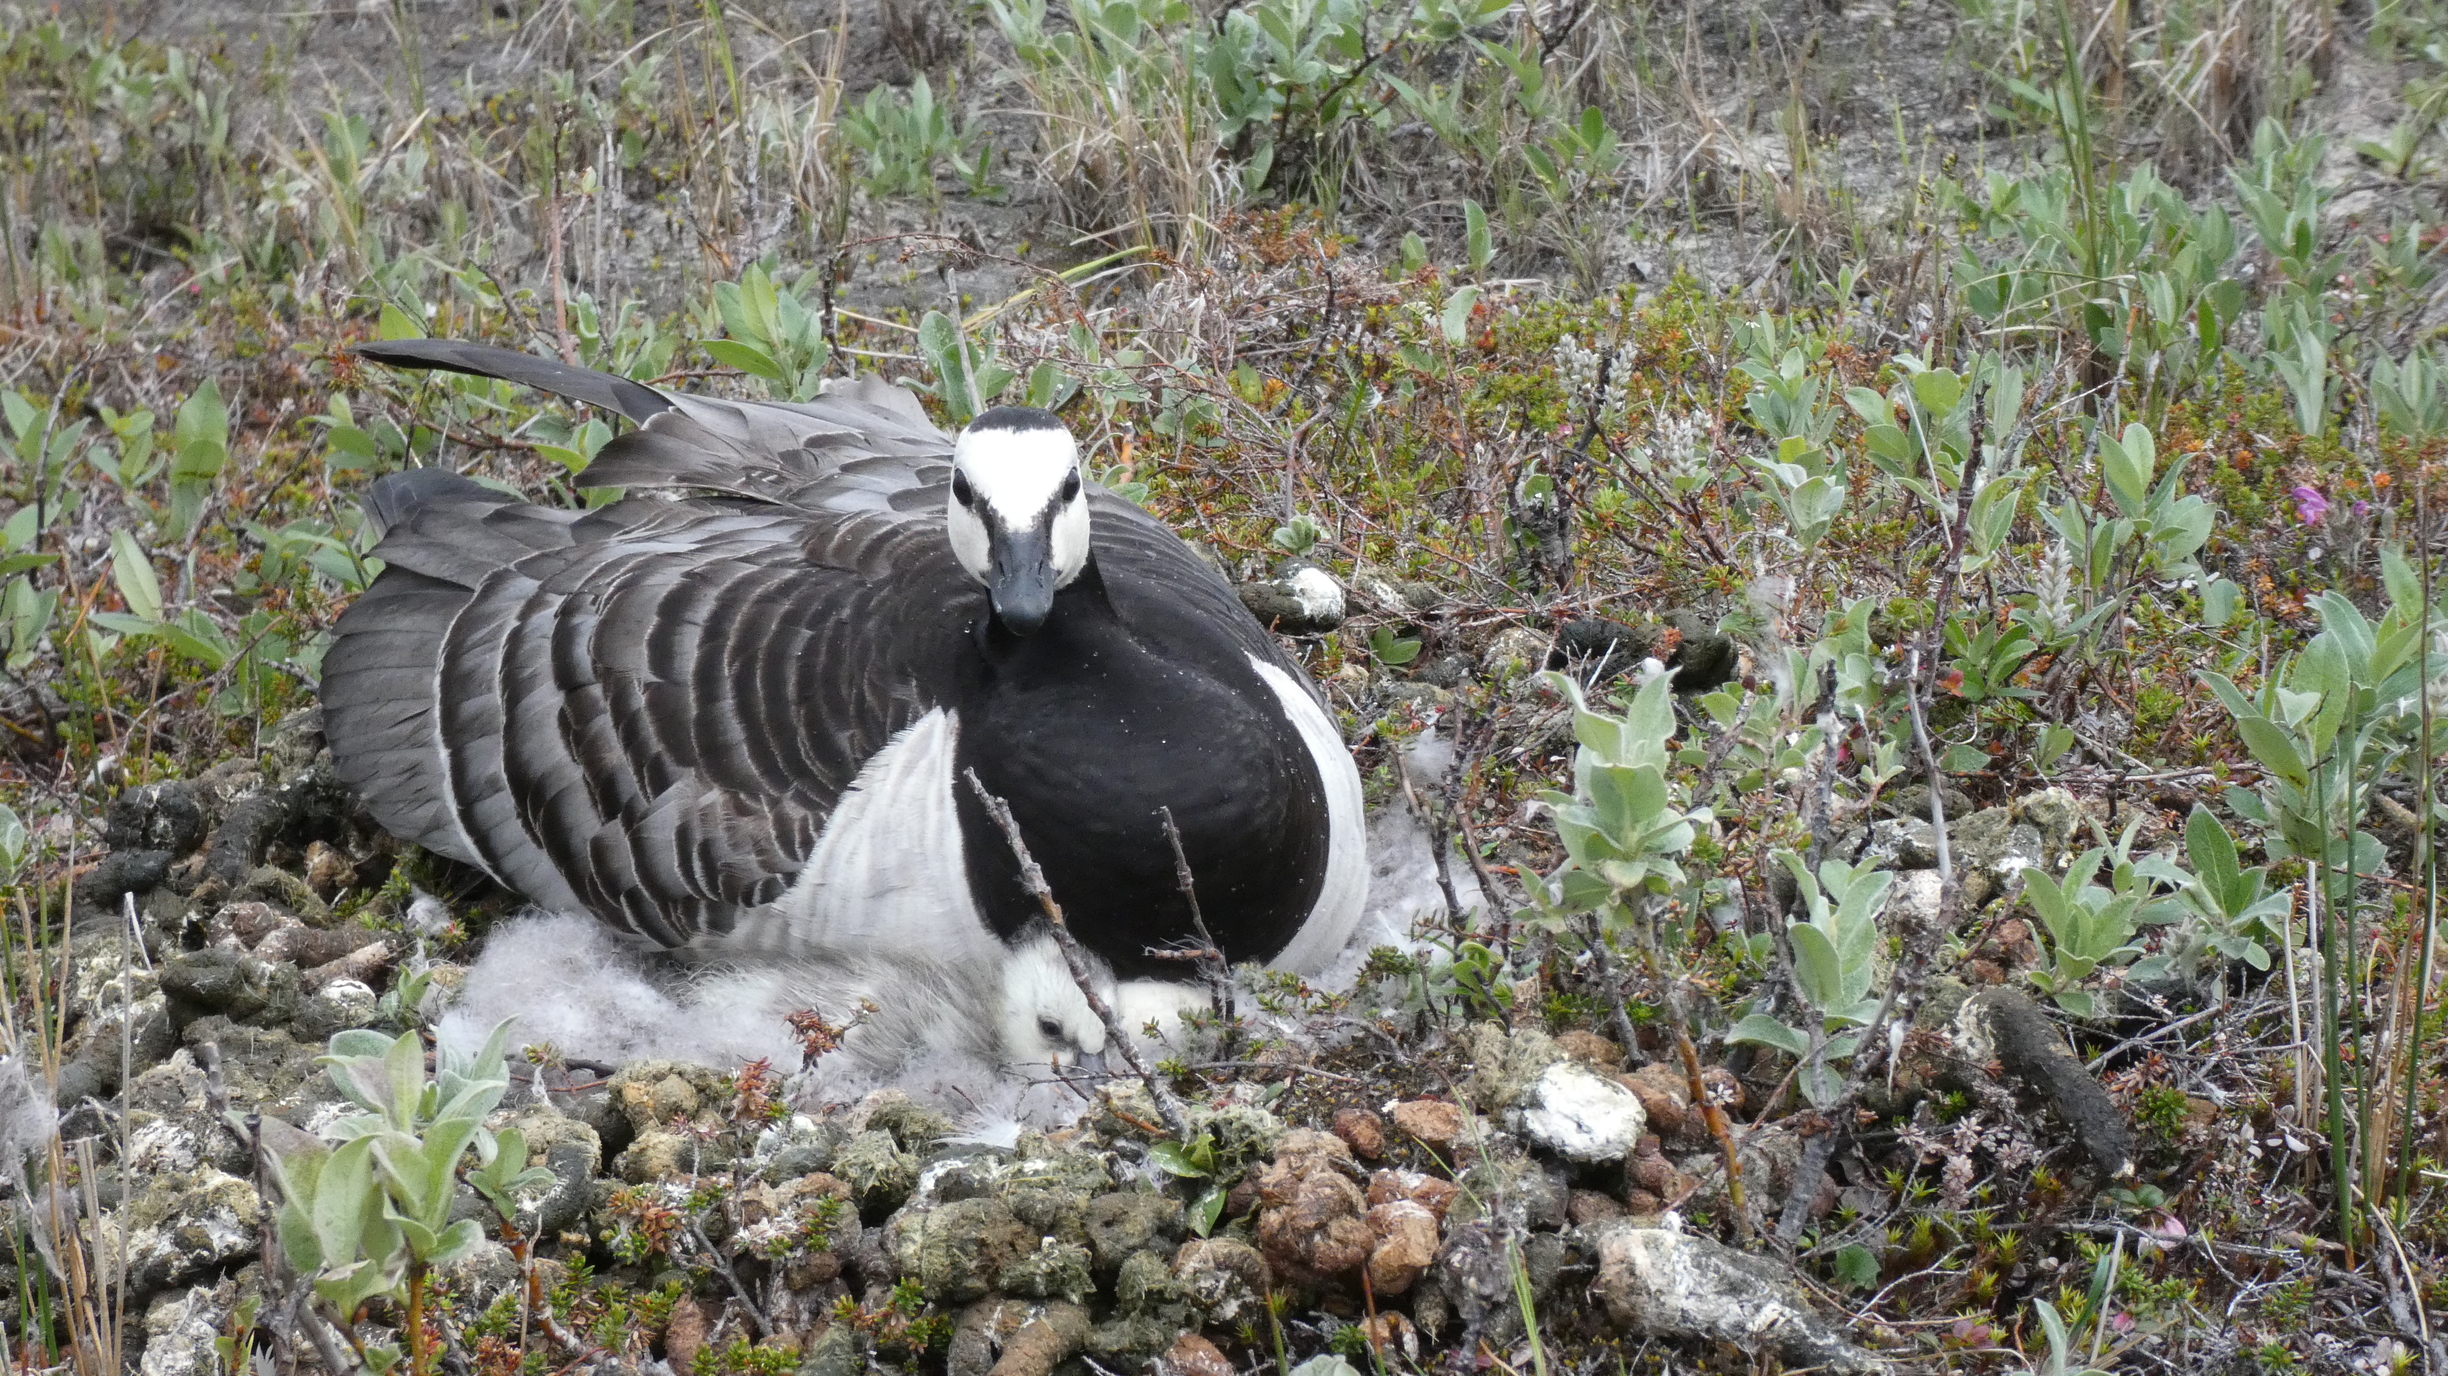 a gray, black, and white goose with a fluffy gray nestling, nestled on the ground in tundra habitat